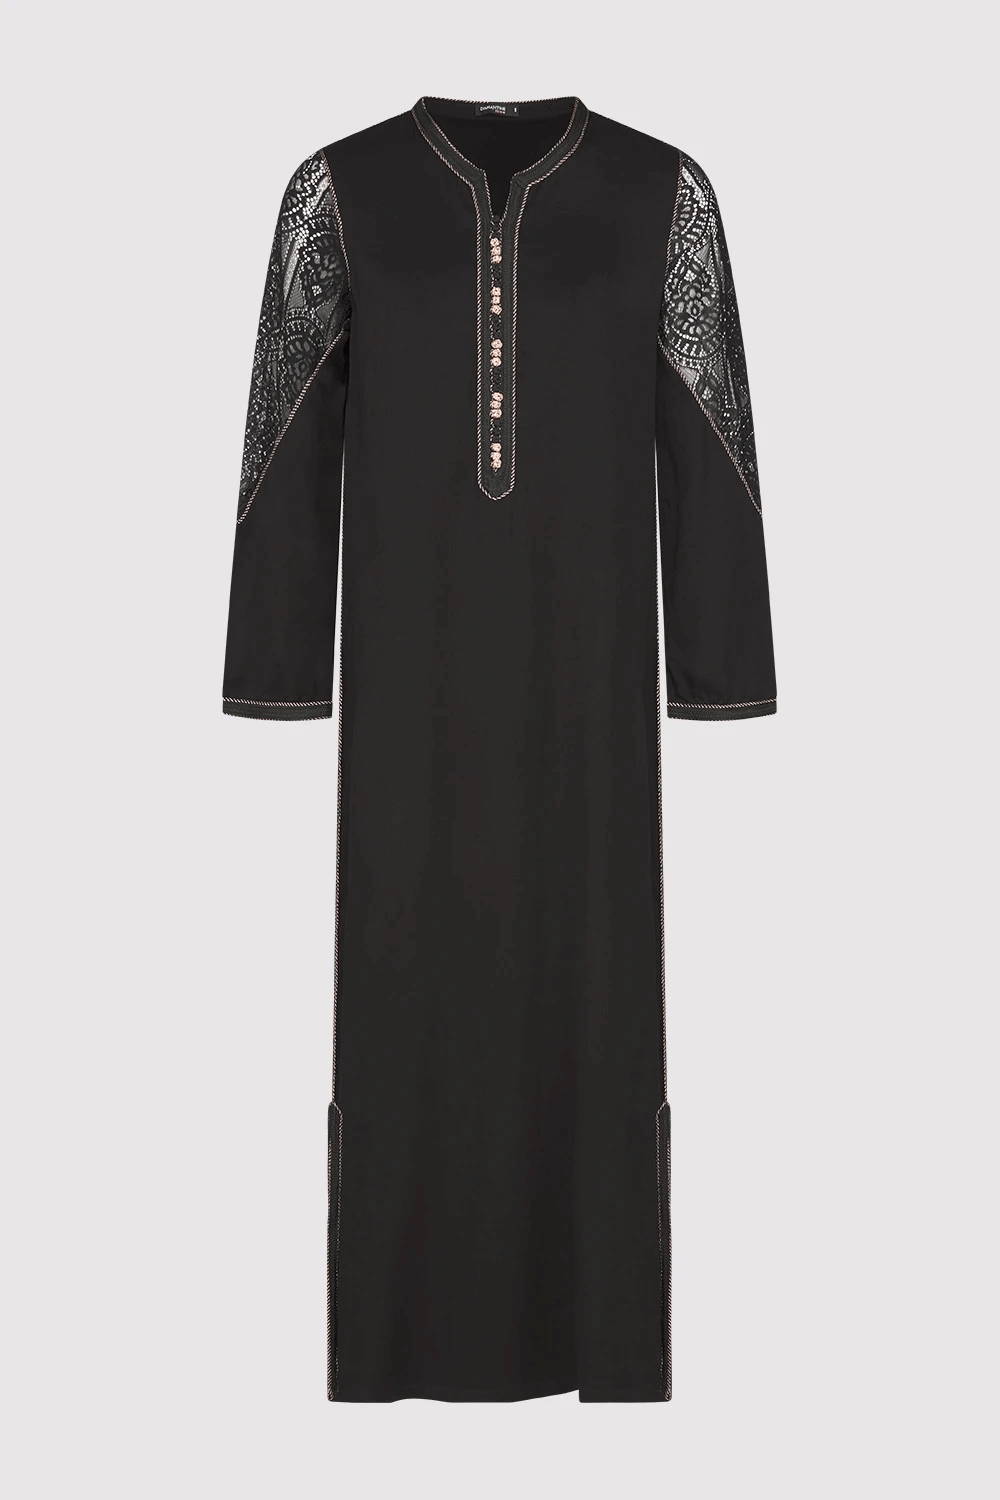 Kmiss Chadia Long Sleeve Maxi Dress with Lace Sleeve in Black